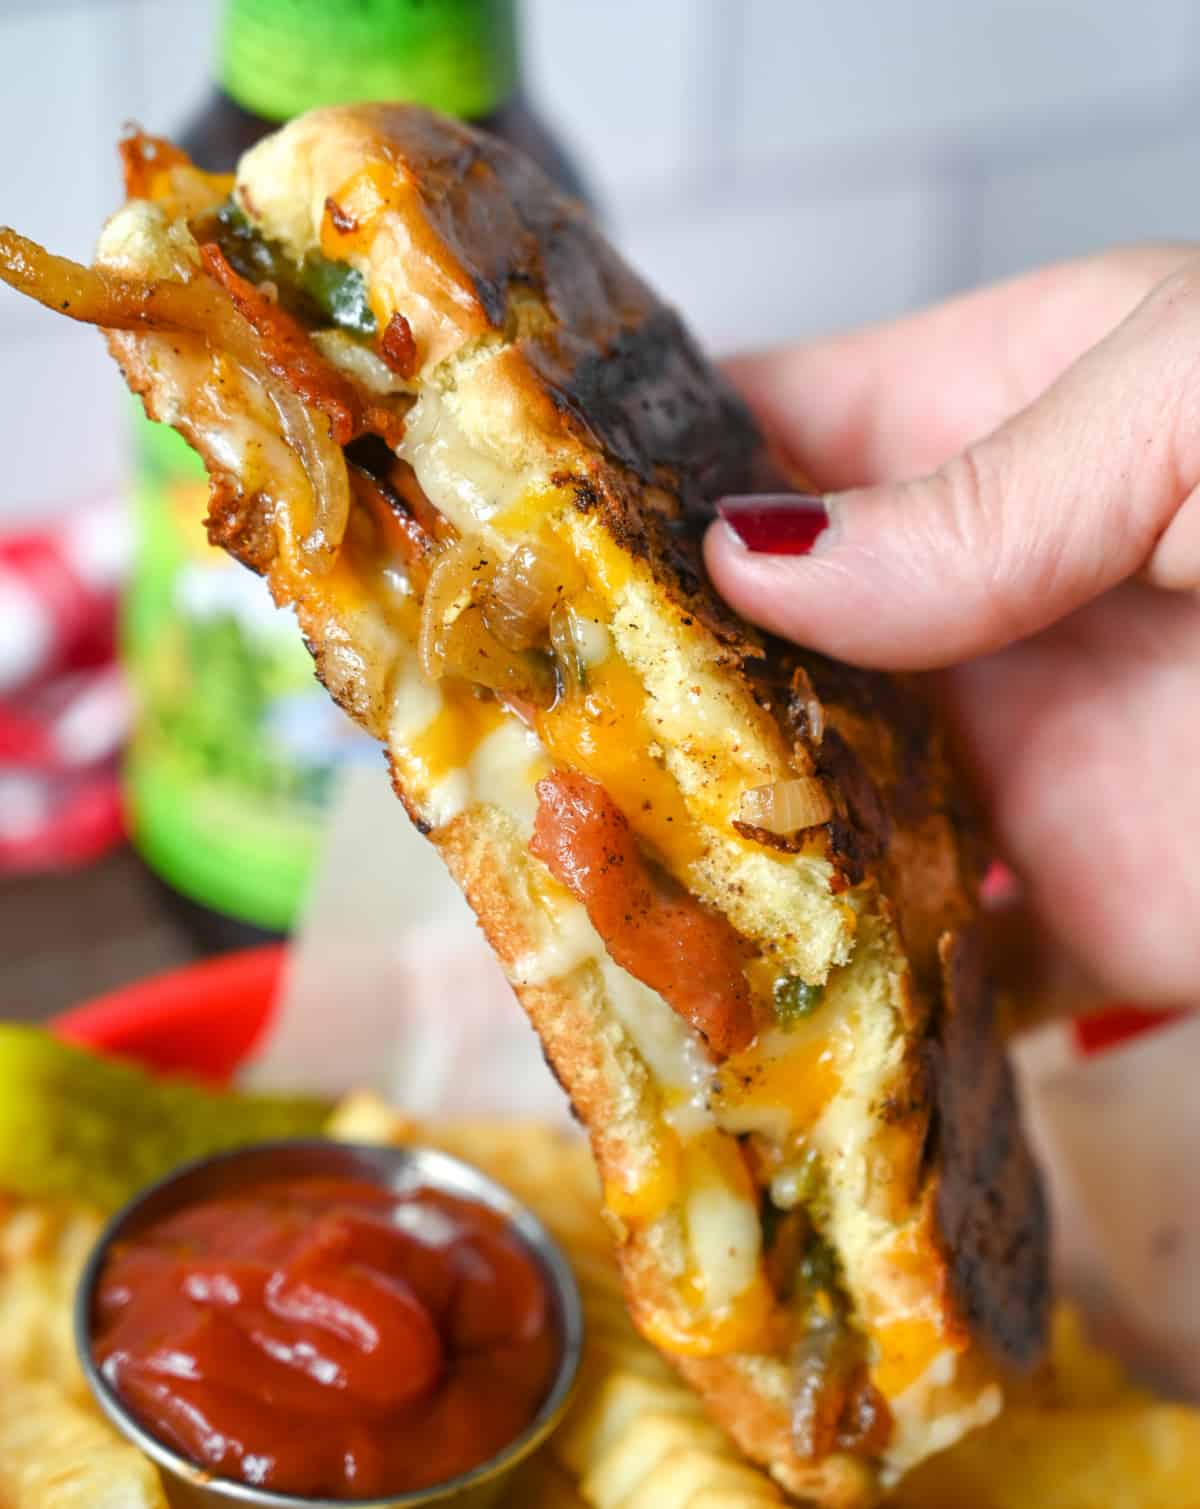 Hot dog grilled cheese is being held in a hand.